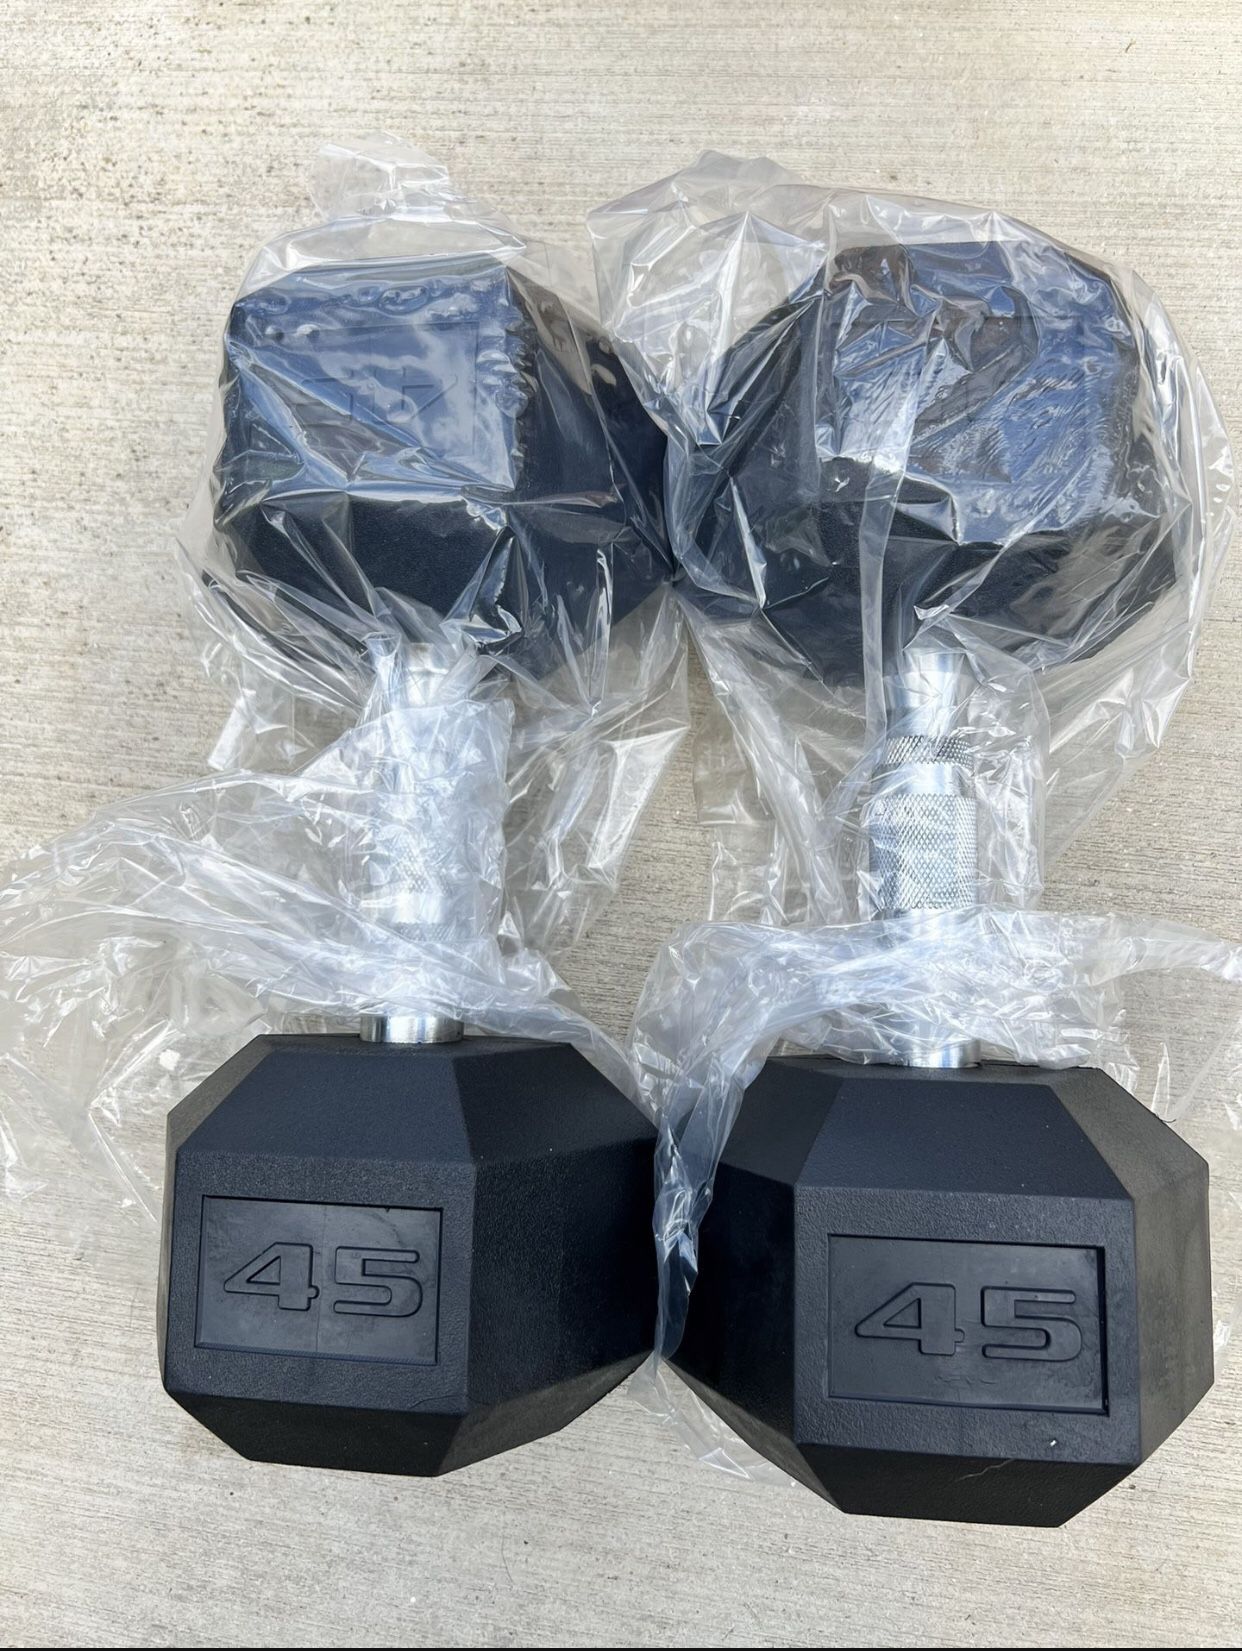 Hex Dumbbells 💪 (2x45Lbs) for $70 Firm on Price 